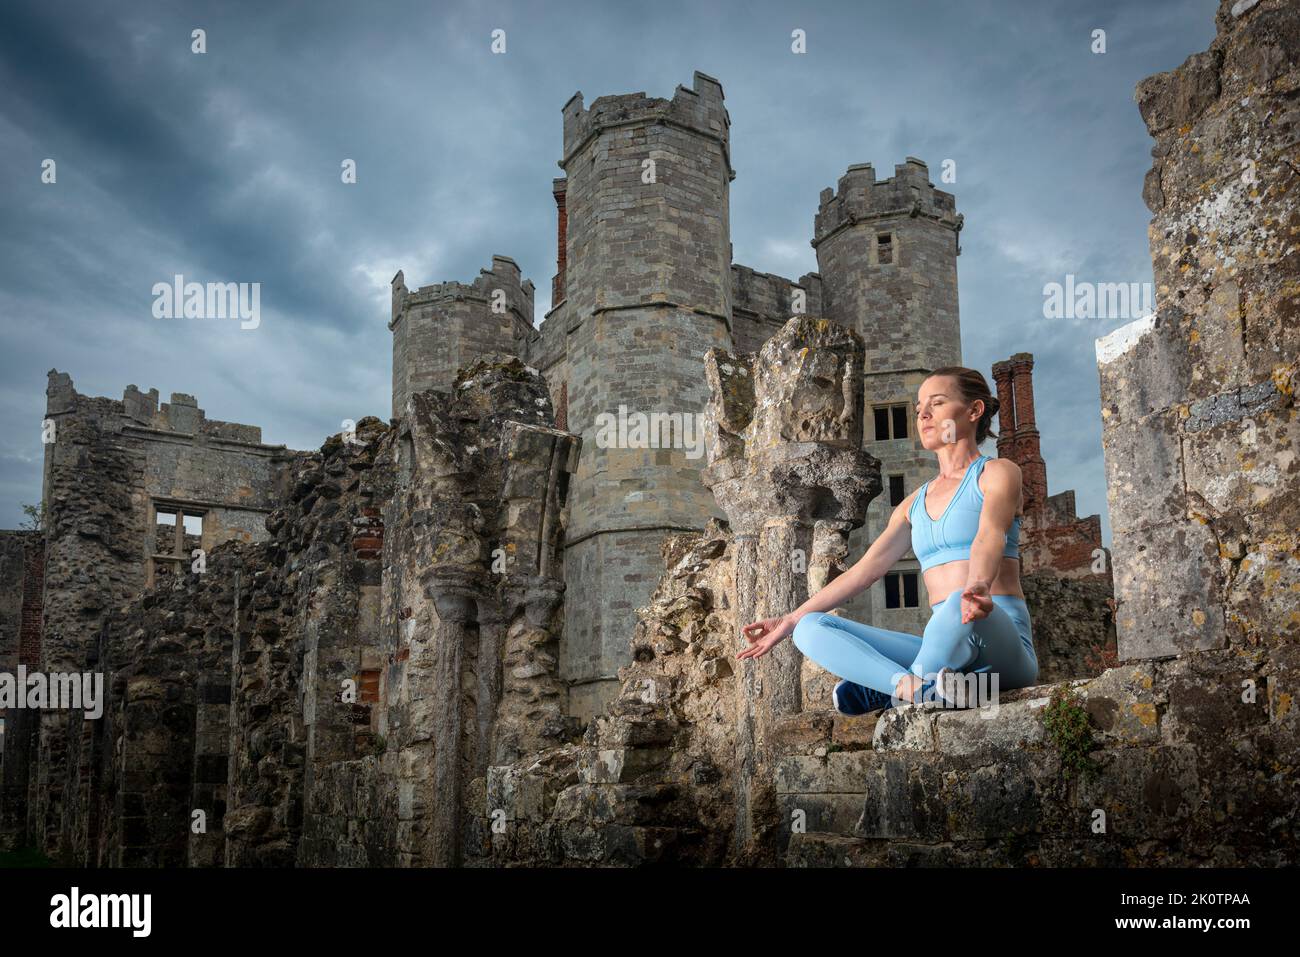 Fit, sporty woman practicing yoga and meditating sitting in historical ruins Stock Photo